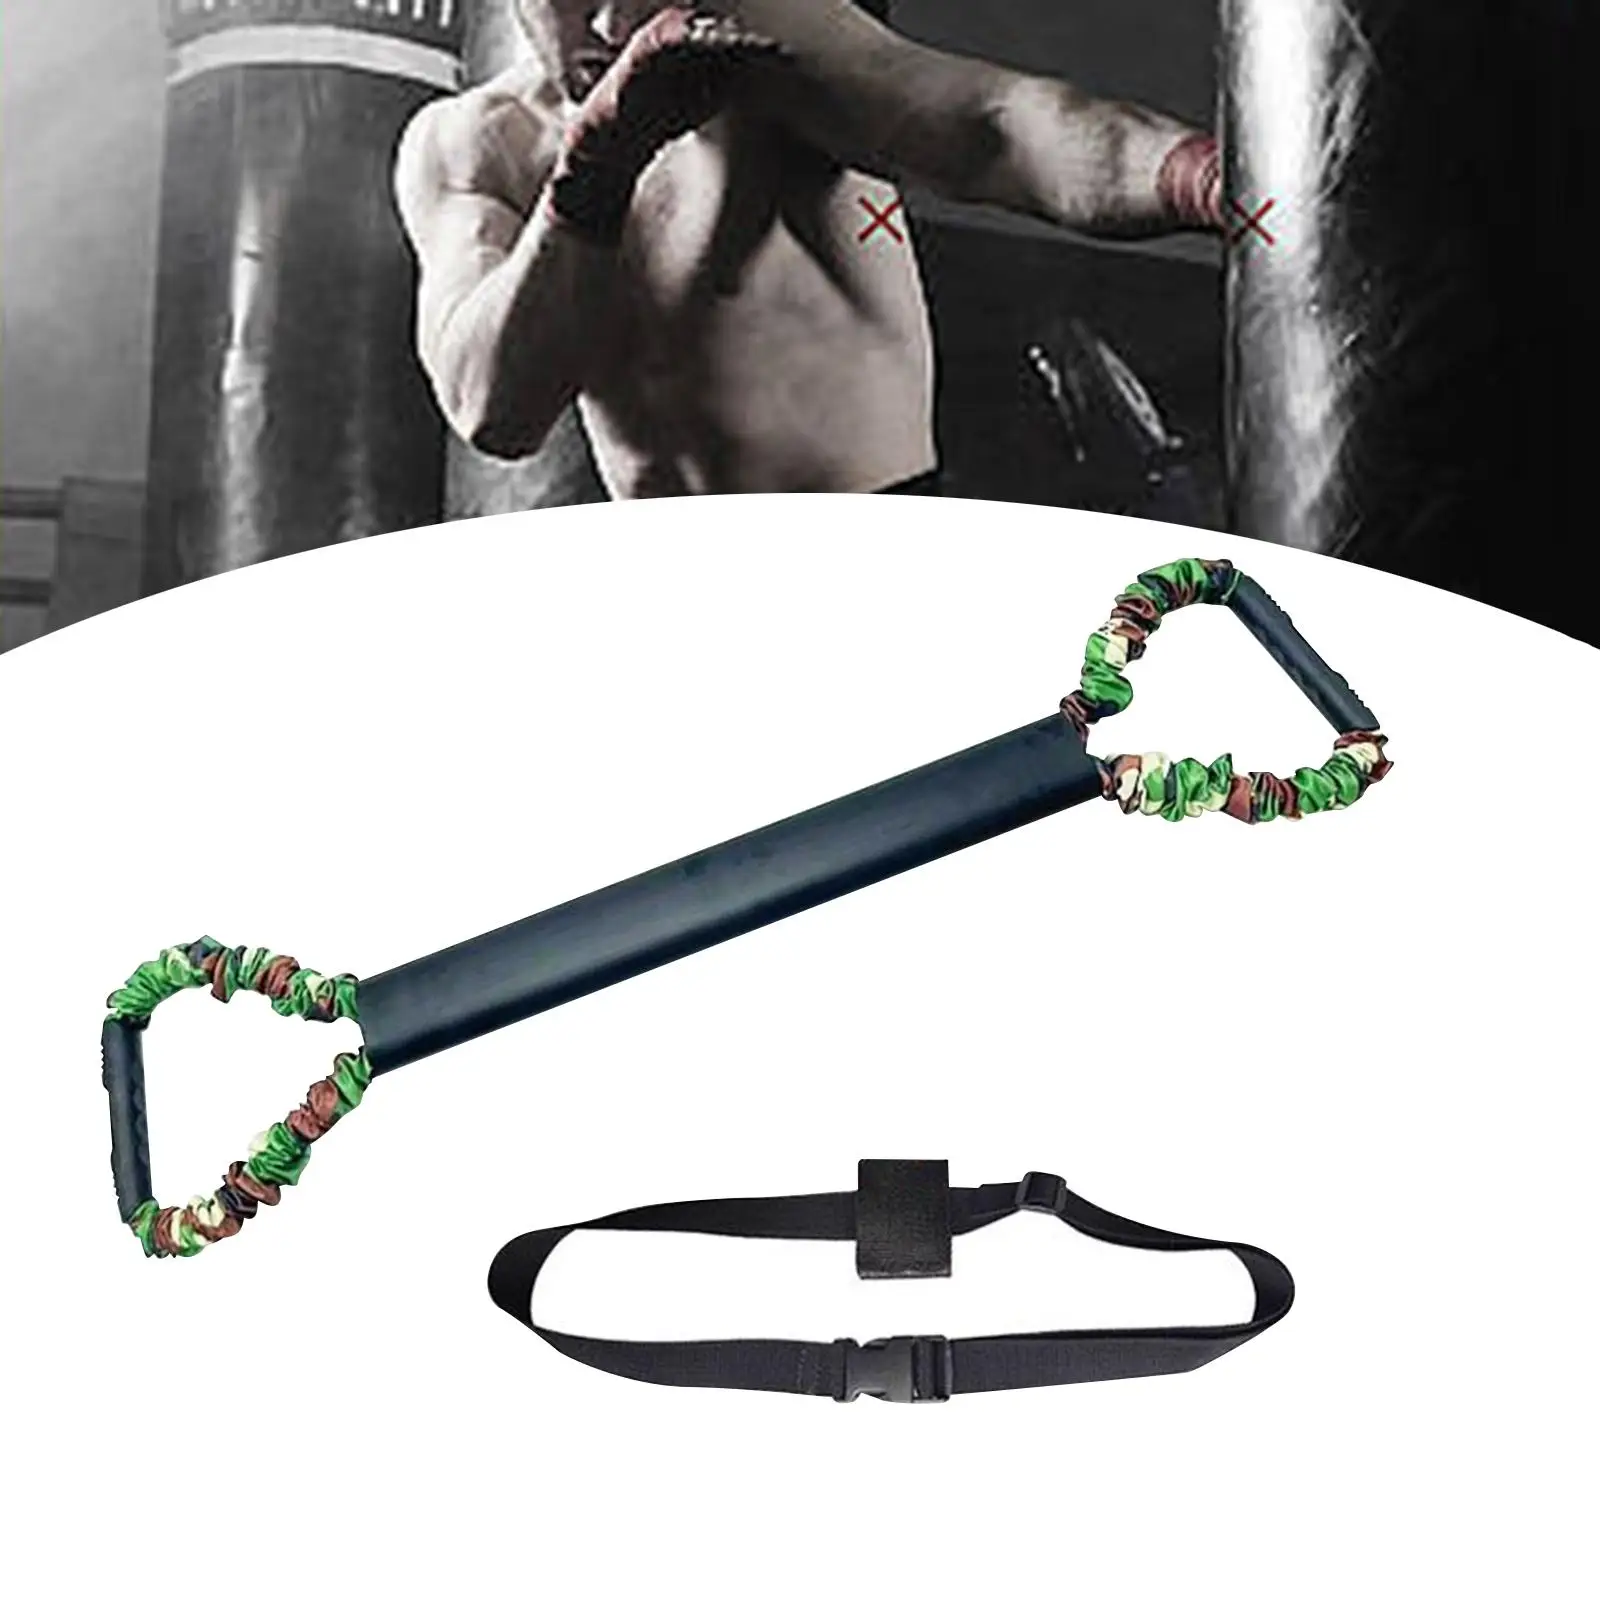 Boxing Resistance Band Workout Equipment Strength Training Exercise Band Pulling Rope for Shadow Boxing Mma Legs Arm Women Men